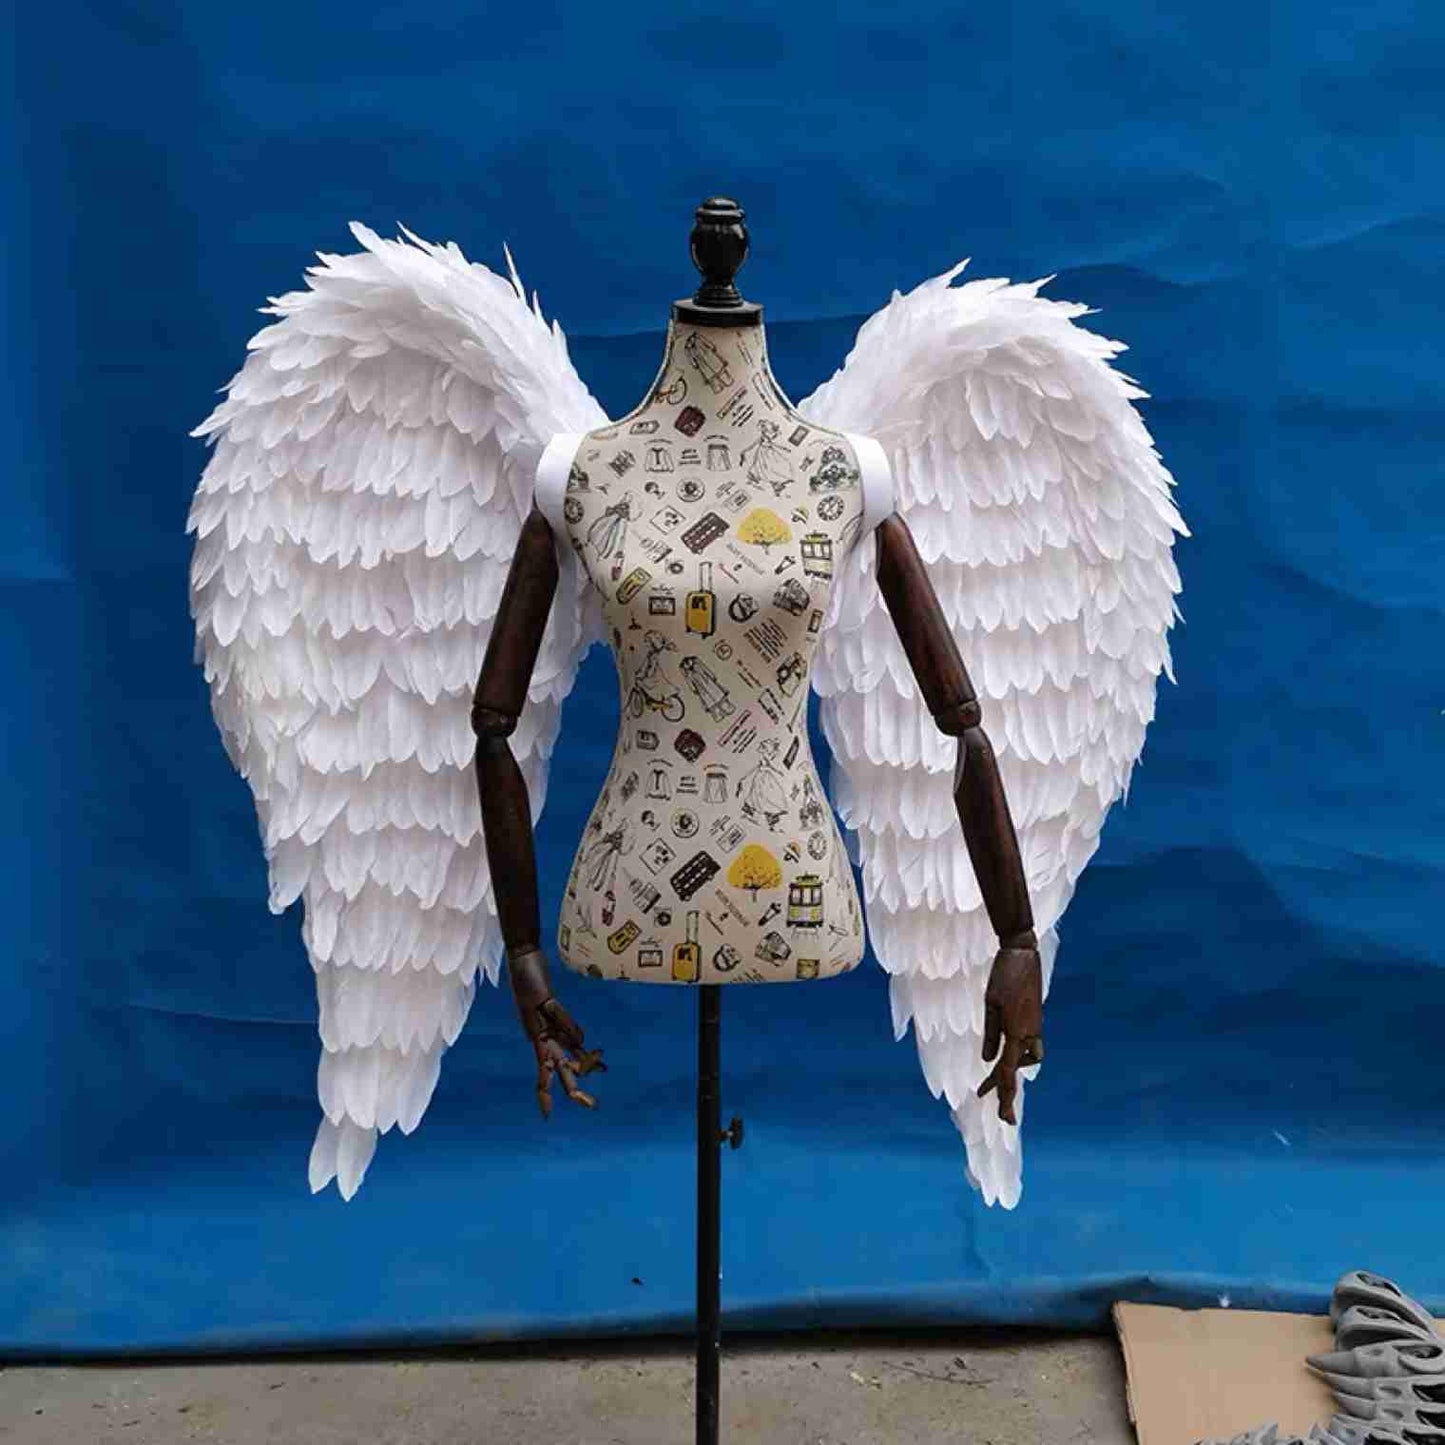 Our little white color angel wings from the front. Made from goose feathers. Wings for angel costume. Suitable for photoshoots.